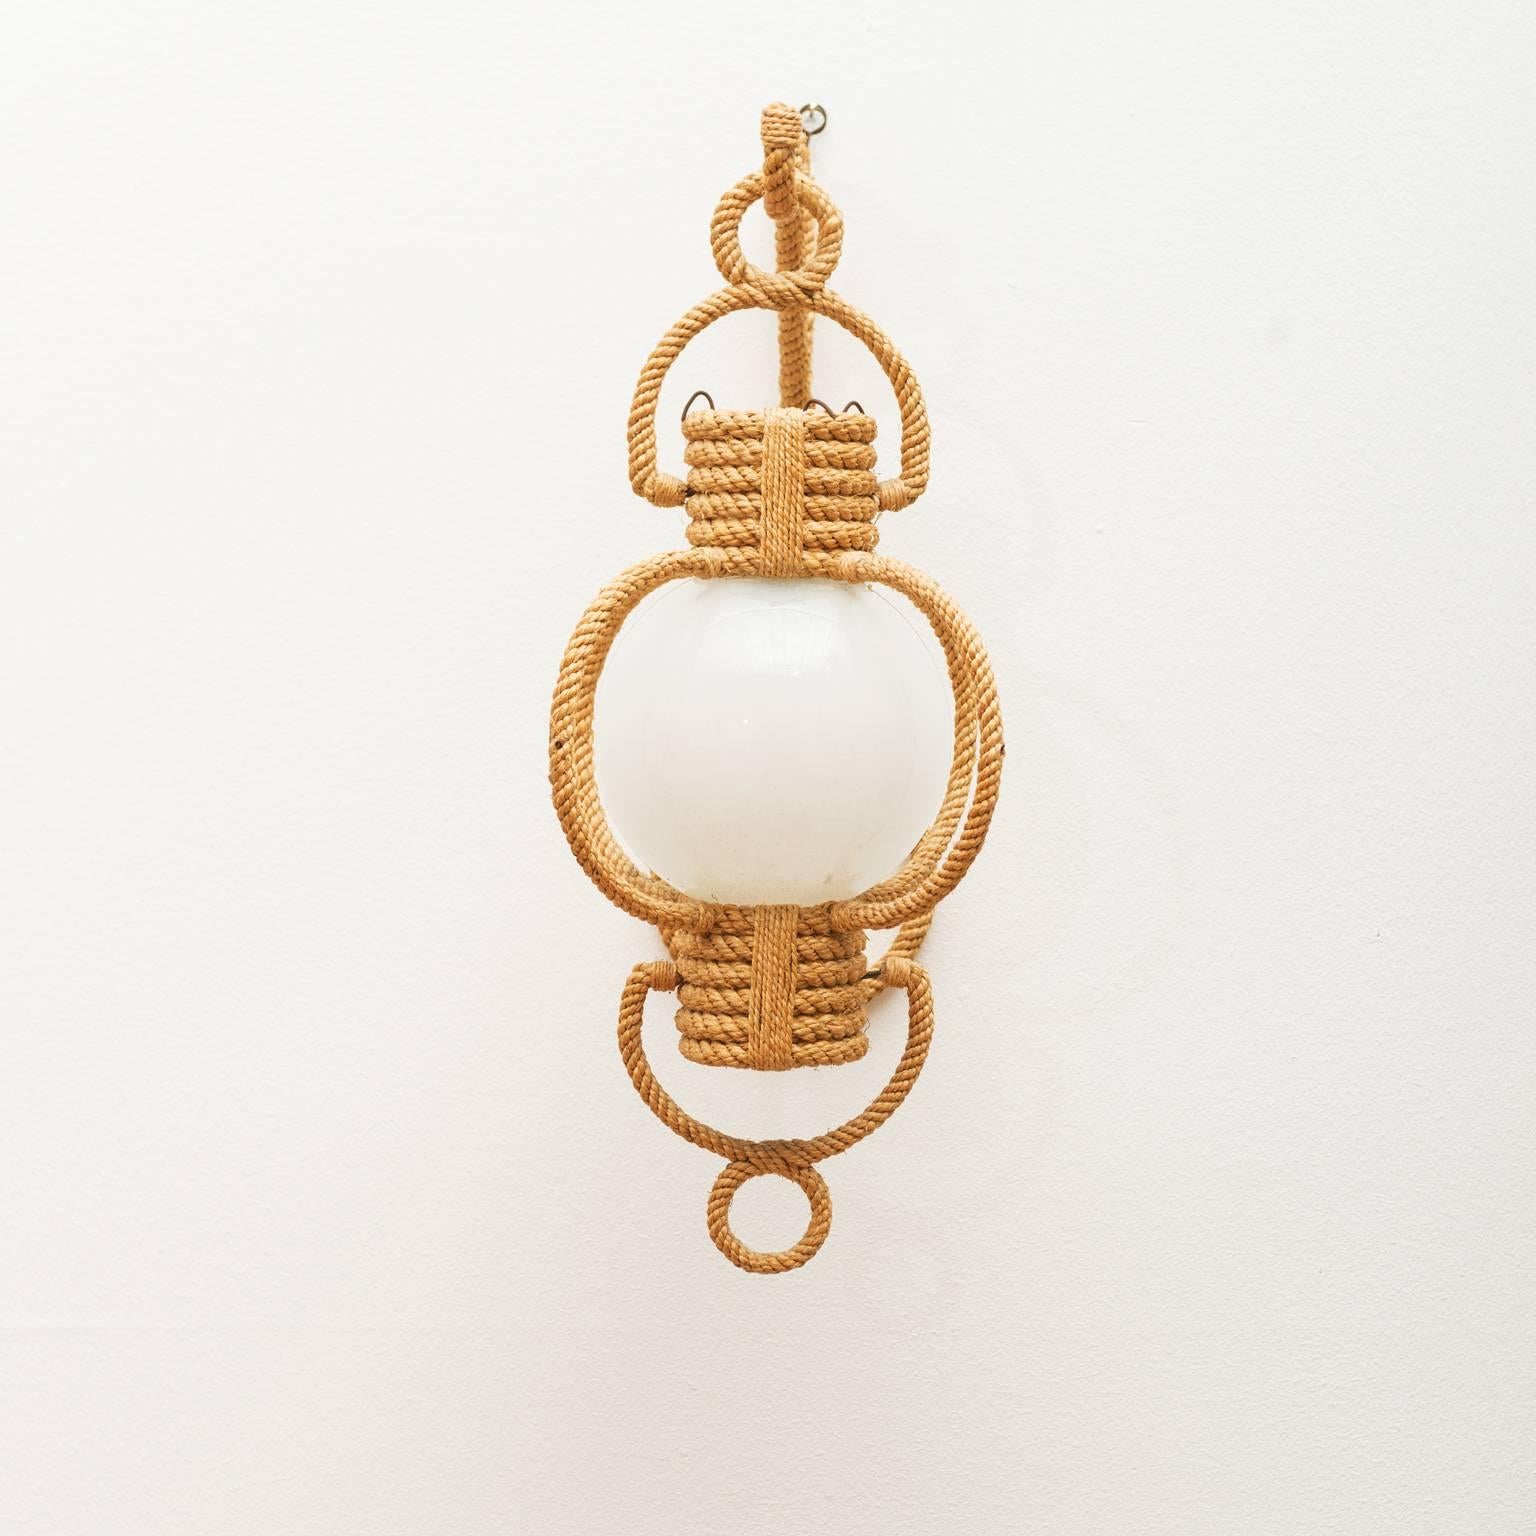 A lovely rope sconce designed and executed by French Riviera designers Adrien Audoux and Frida Minet. With original glass globe, France, 1960s.

European socket and wiring.